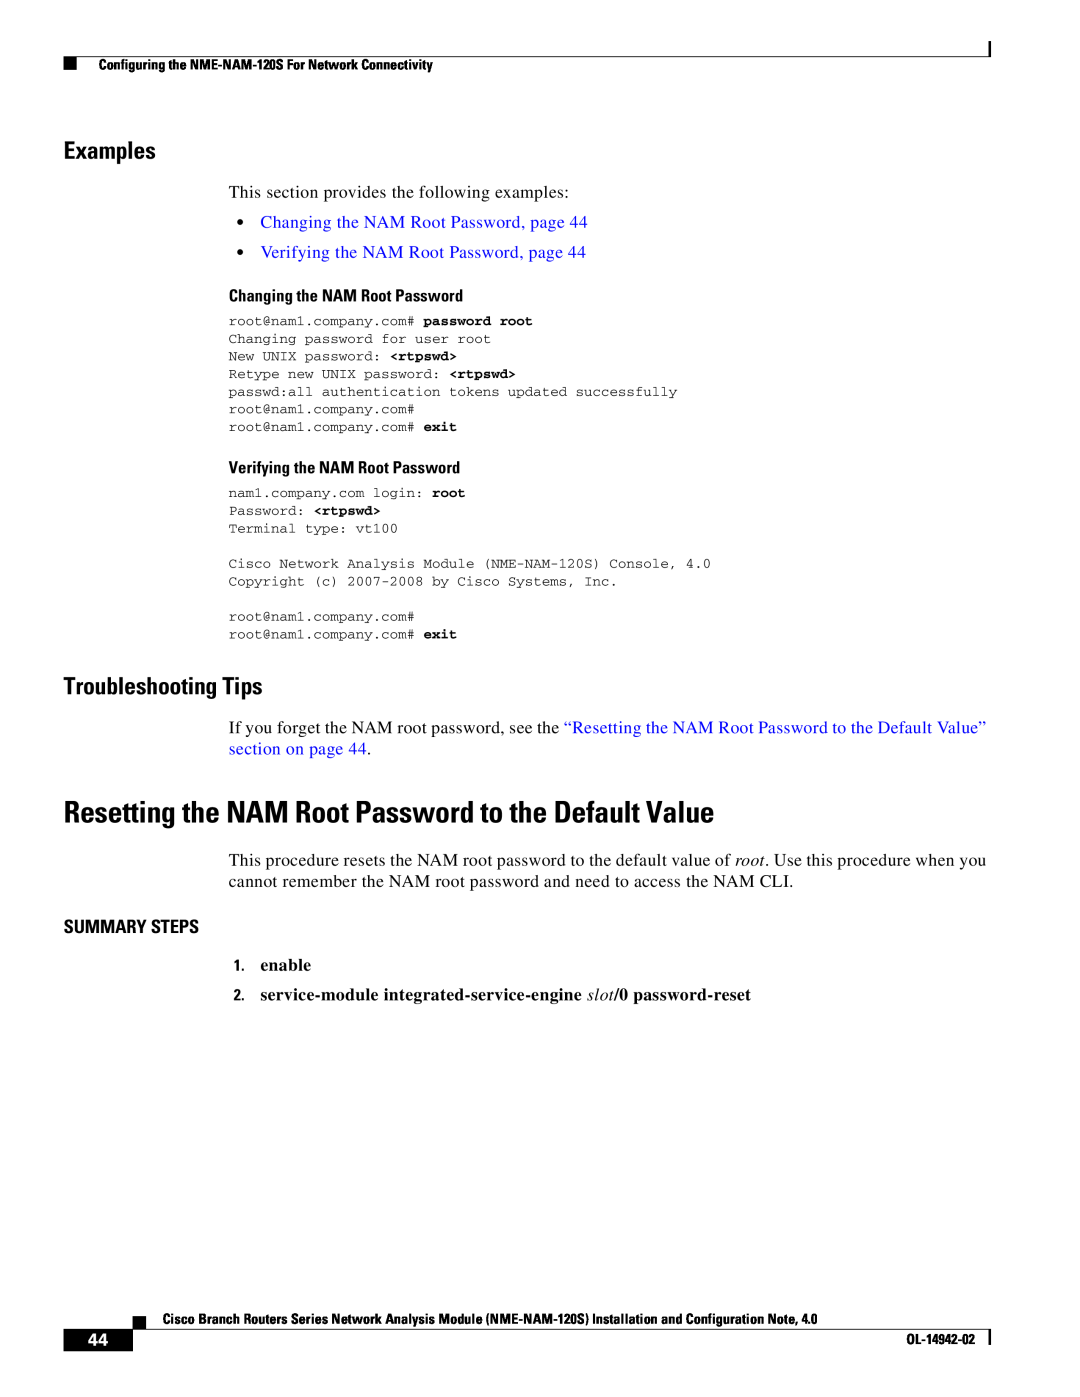 Cisco Systems SMNMADPTR manual Resetting the NAM Root Password to the Default Value, Troubleshooting Tips, Examples, enable 